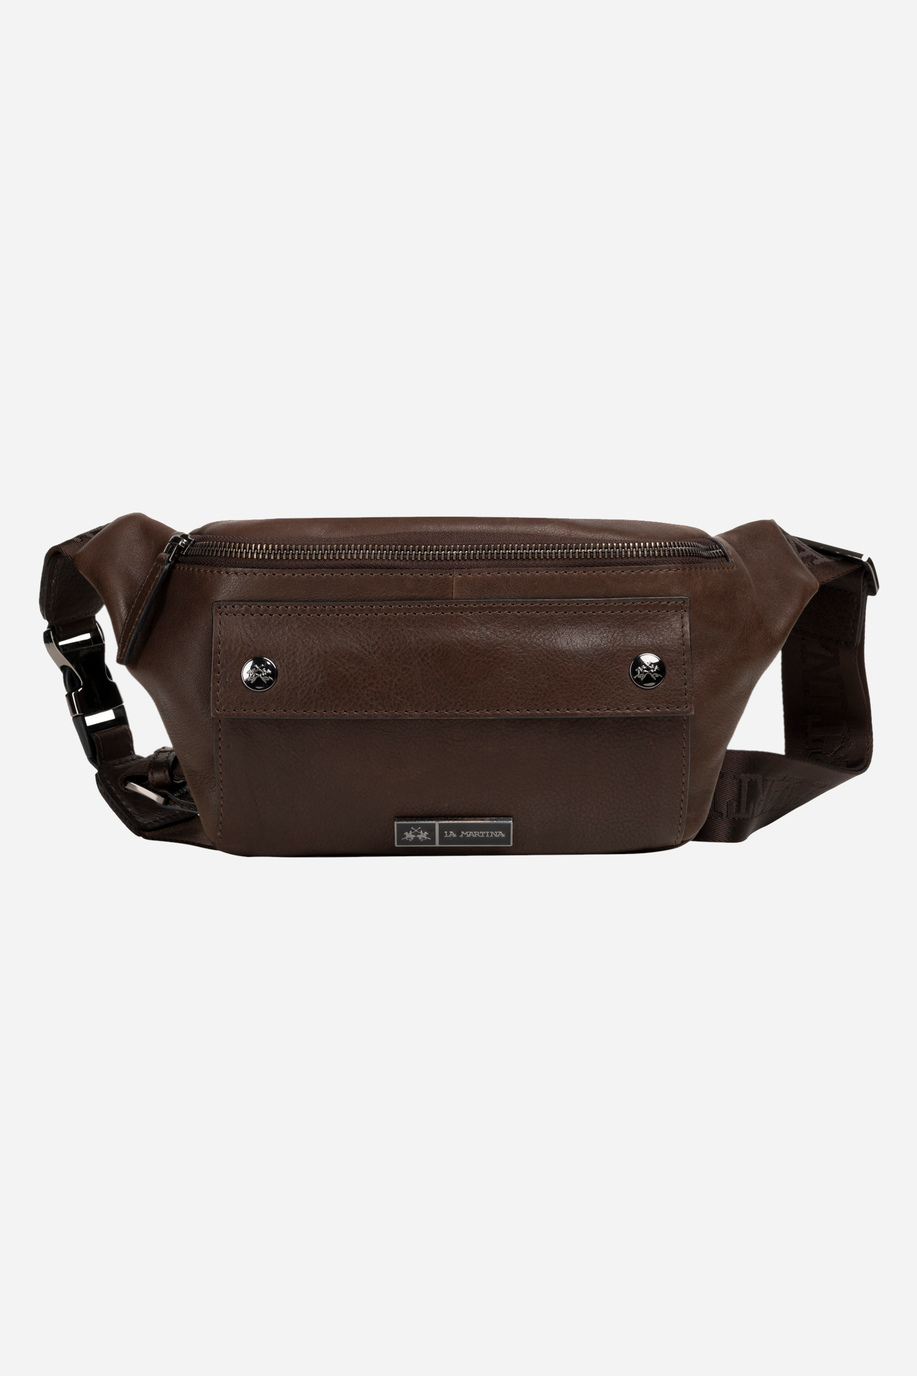 Leather bodybag - Paulo - Bags | La Martina - Official Online Shop